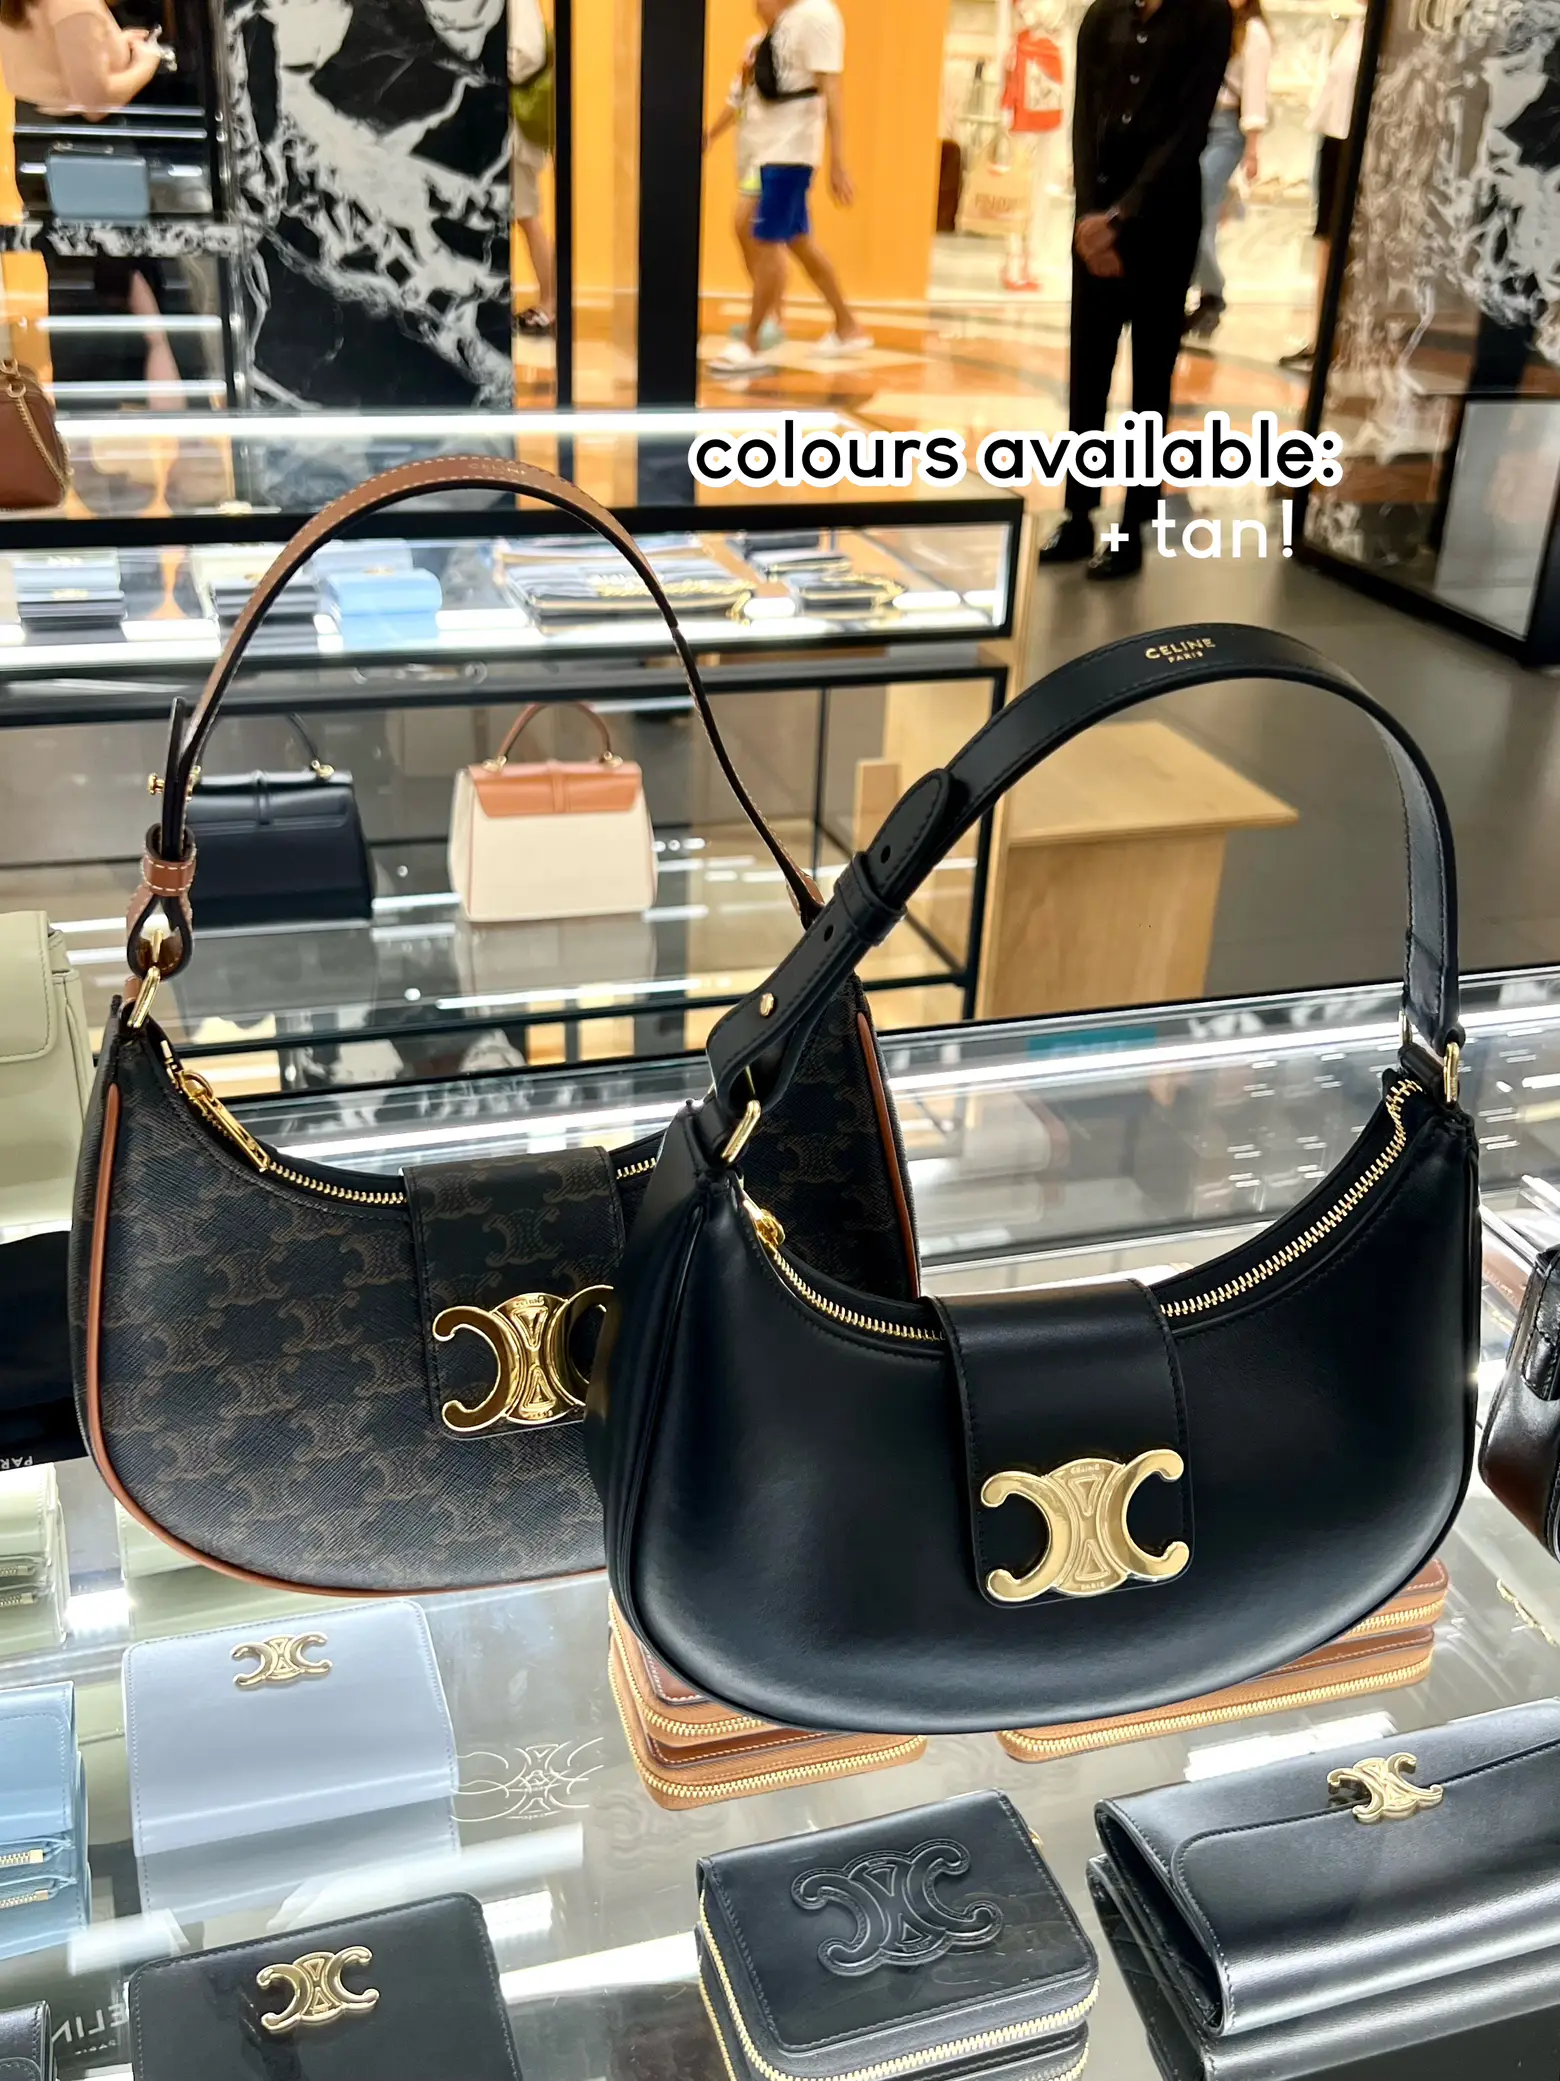 new celine ava in black sold out in sg? 🖤's images(1)